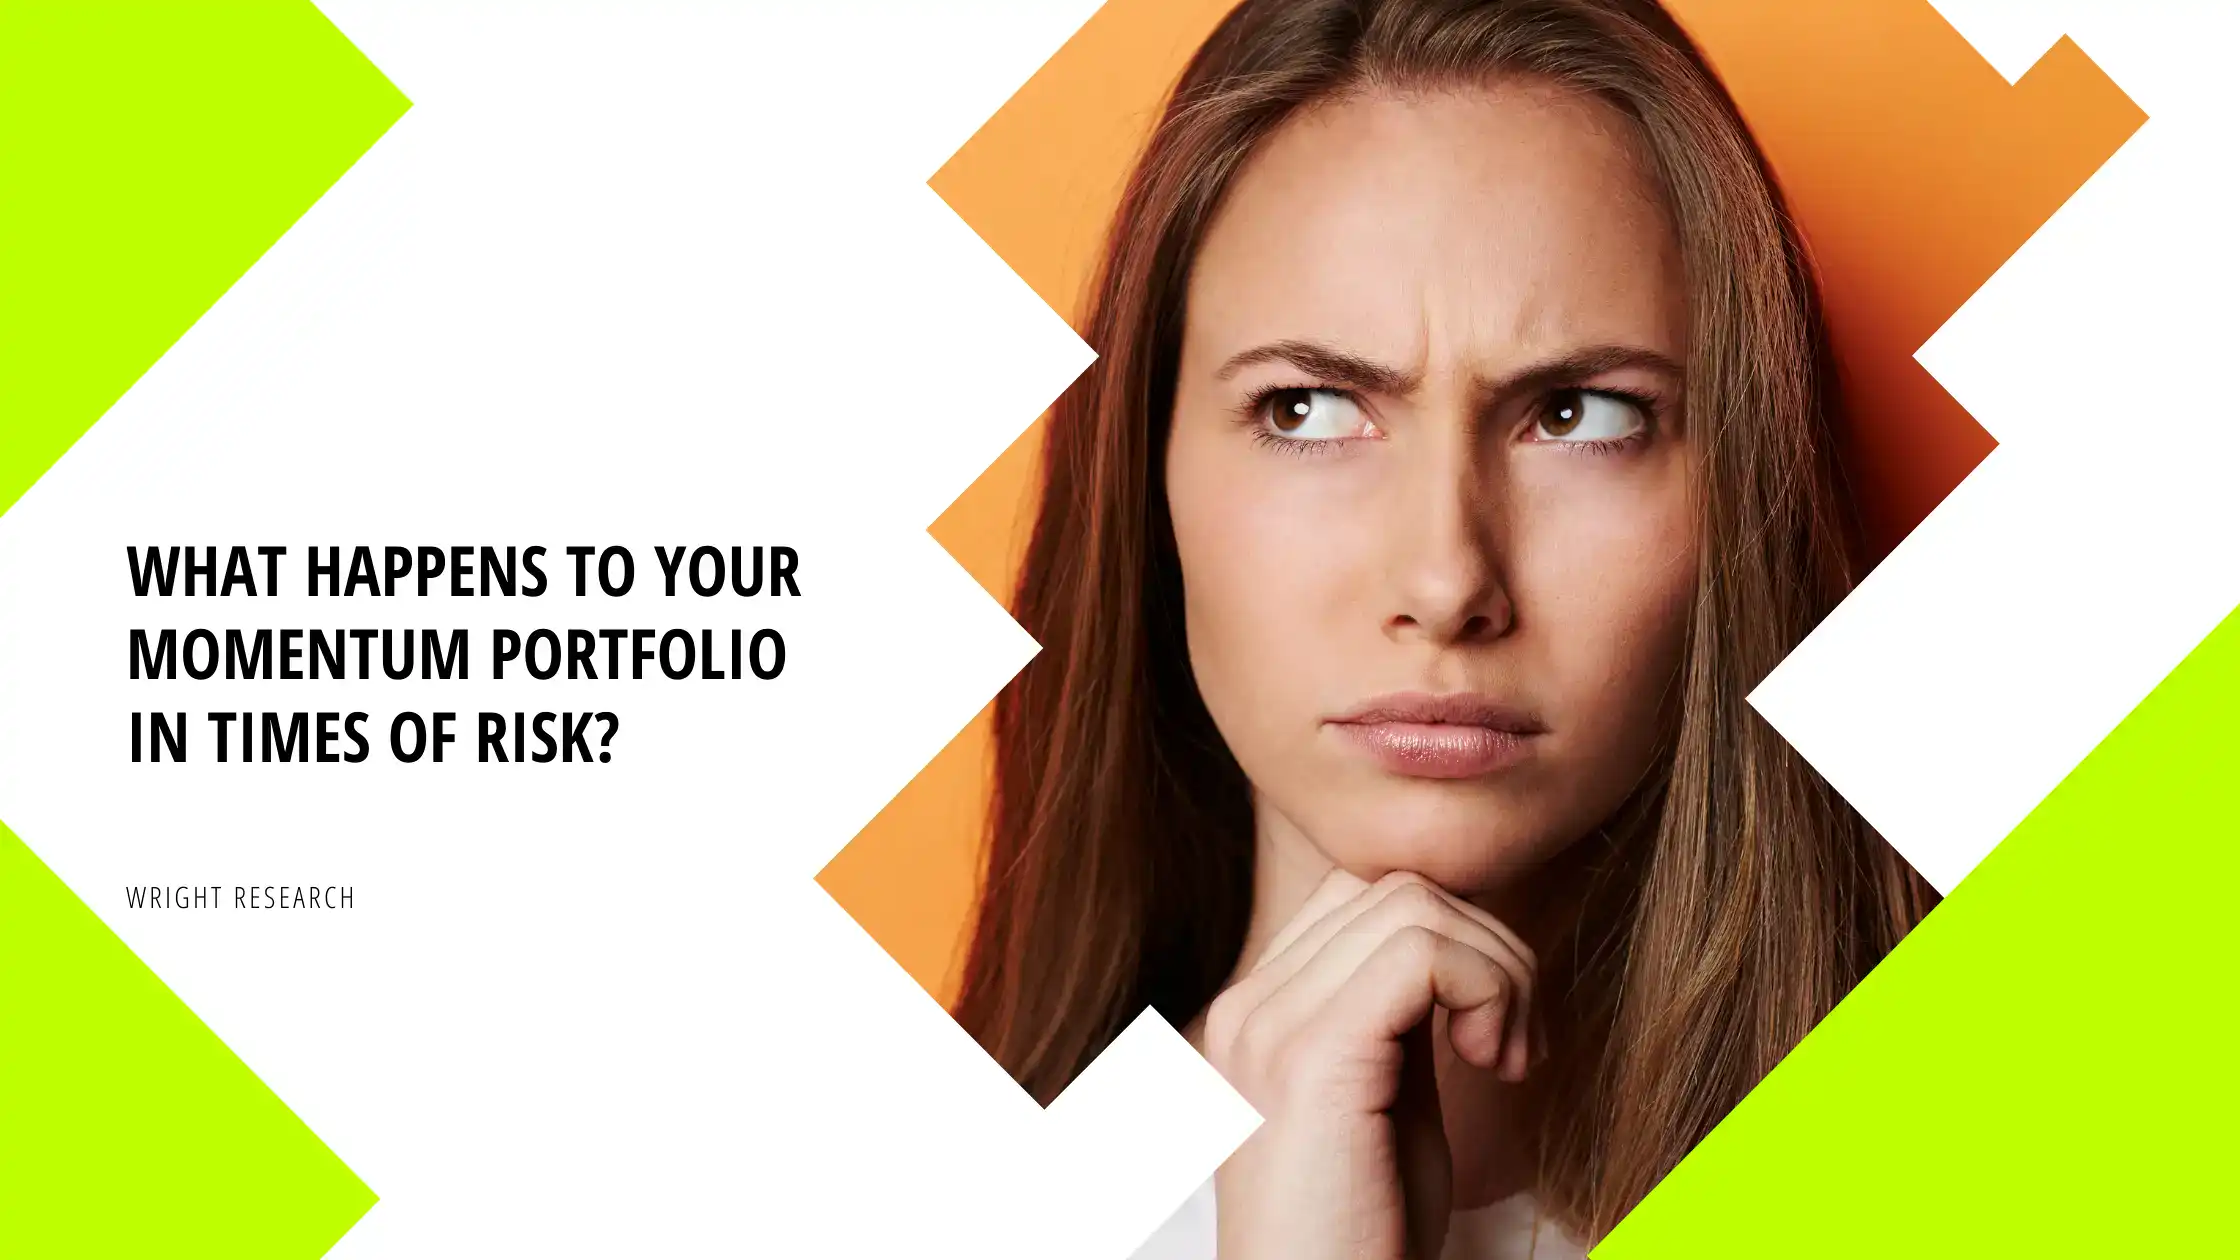 What happens to your momentum portfolio in times of risk?